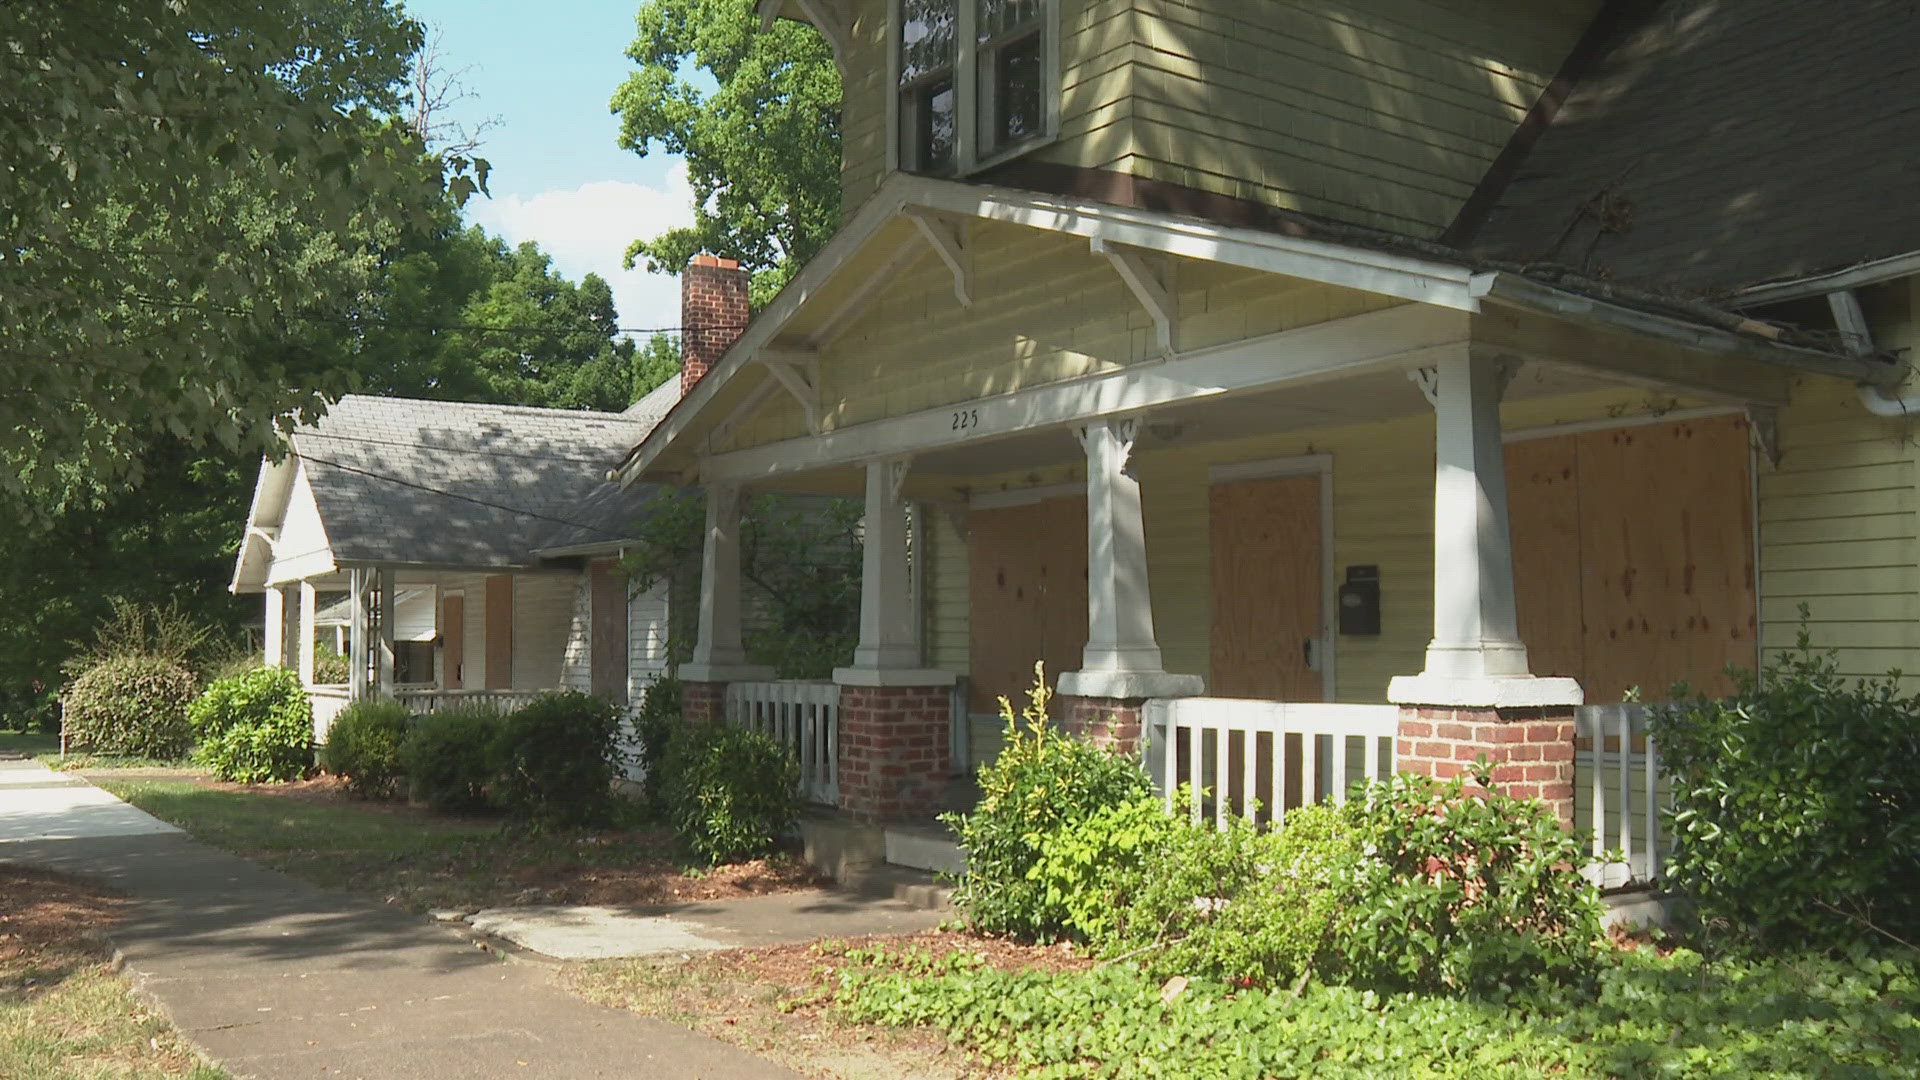 Atrium Health Wake Forest Baptist wants to tear down some homes in the Ardmore neighborhood.